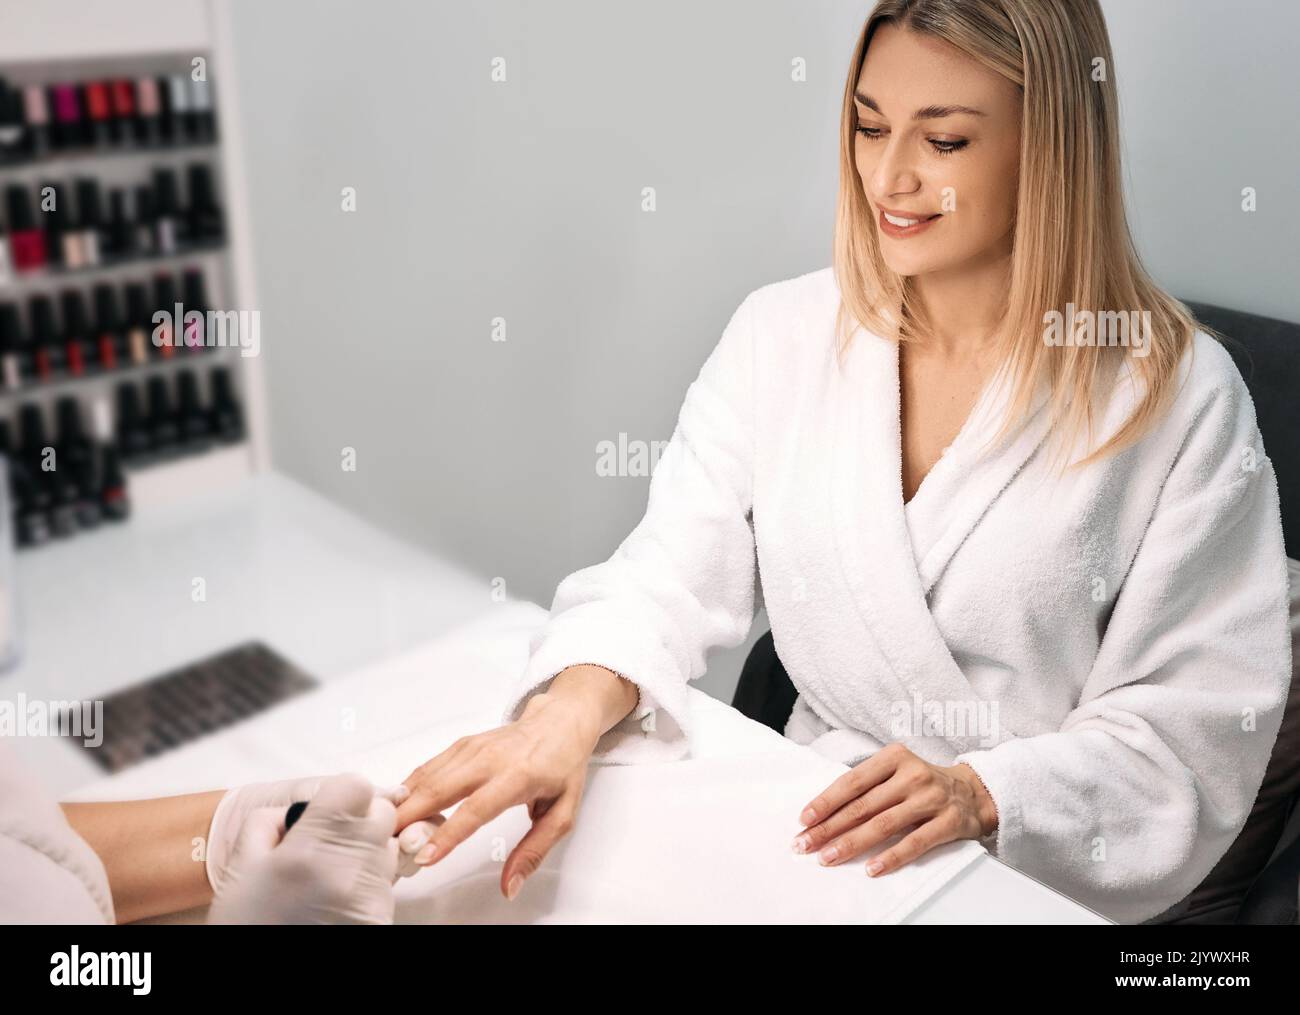 Beautiful woman in bathrobe during manicure in spa salon, taking care of her nails. Manicurist covers woman's nails with nail polish Stock Photo